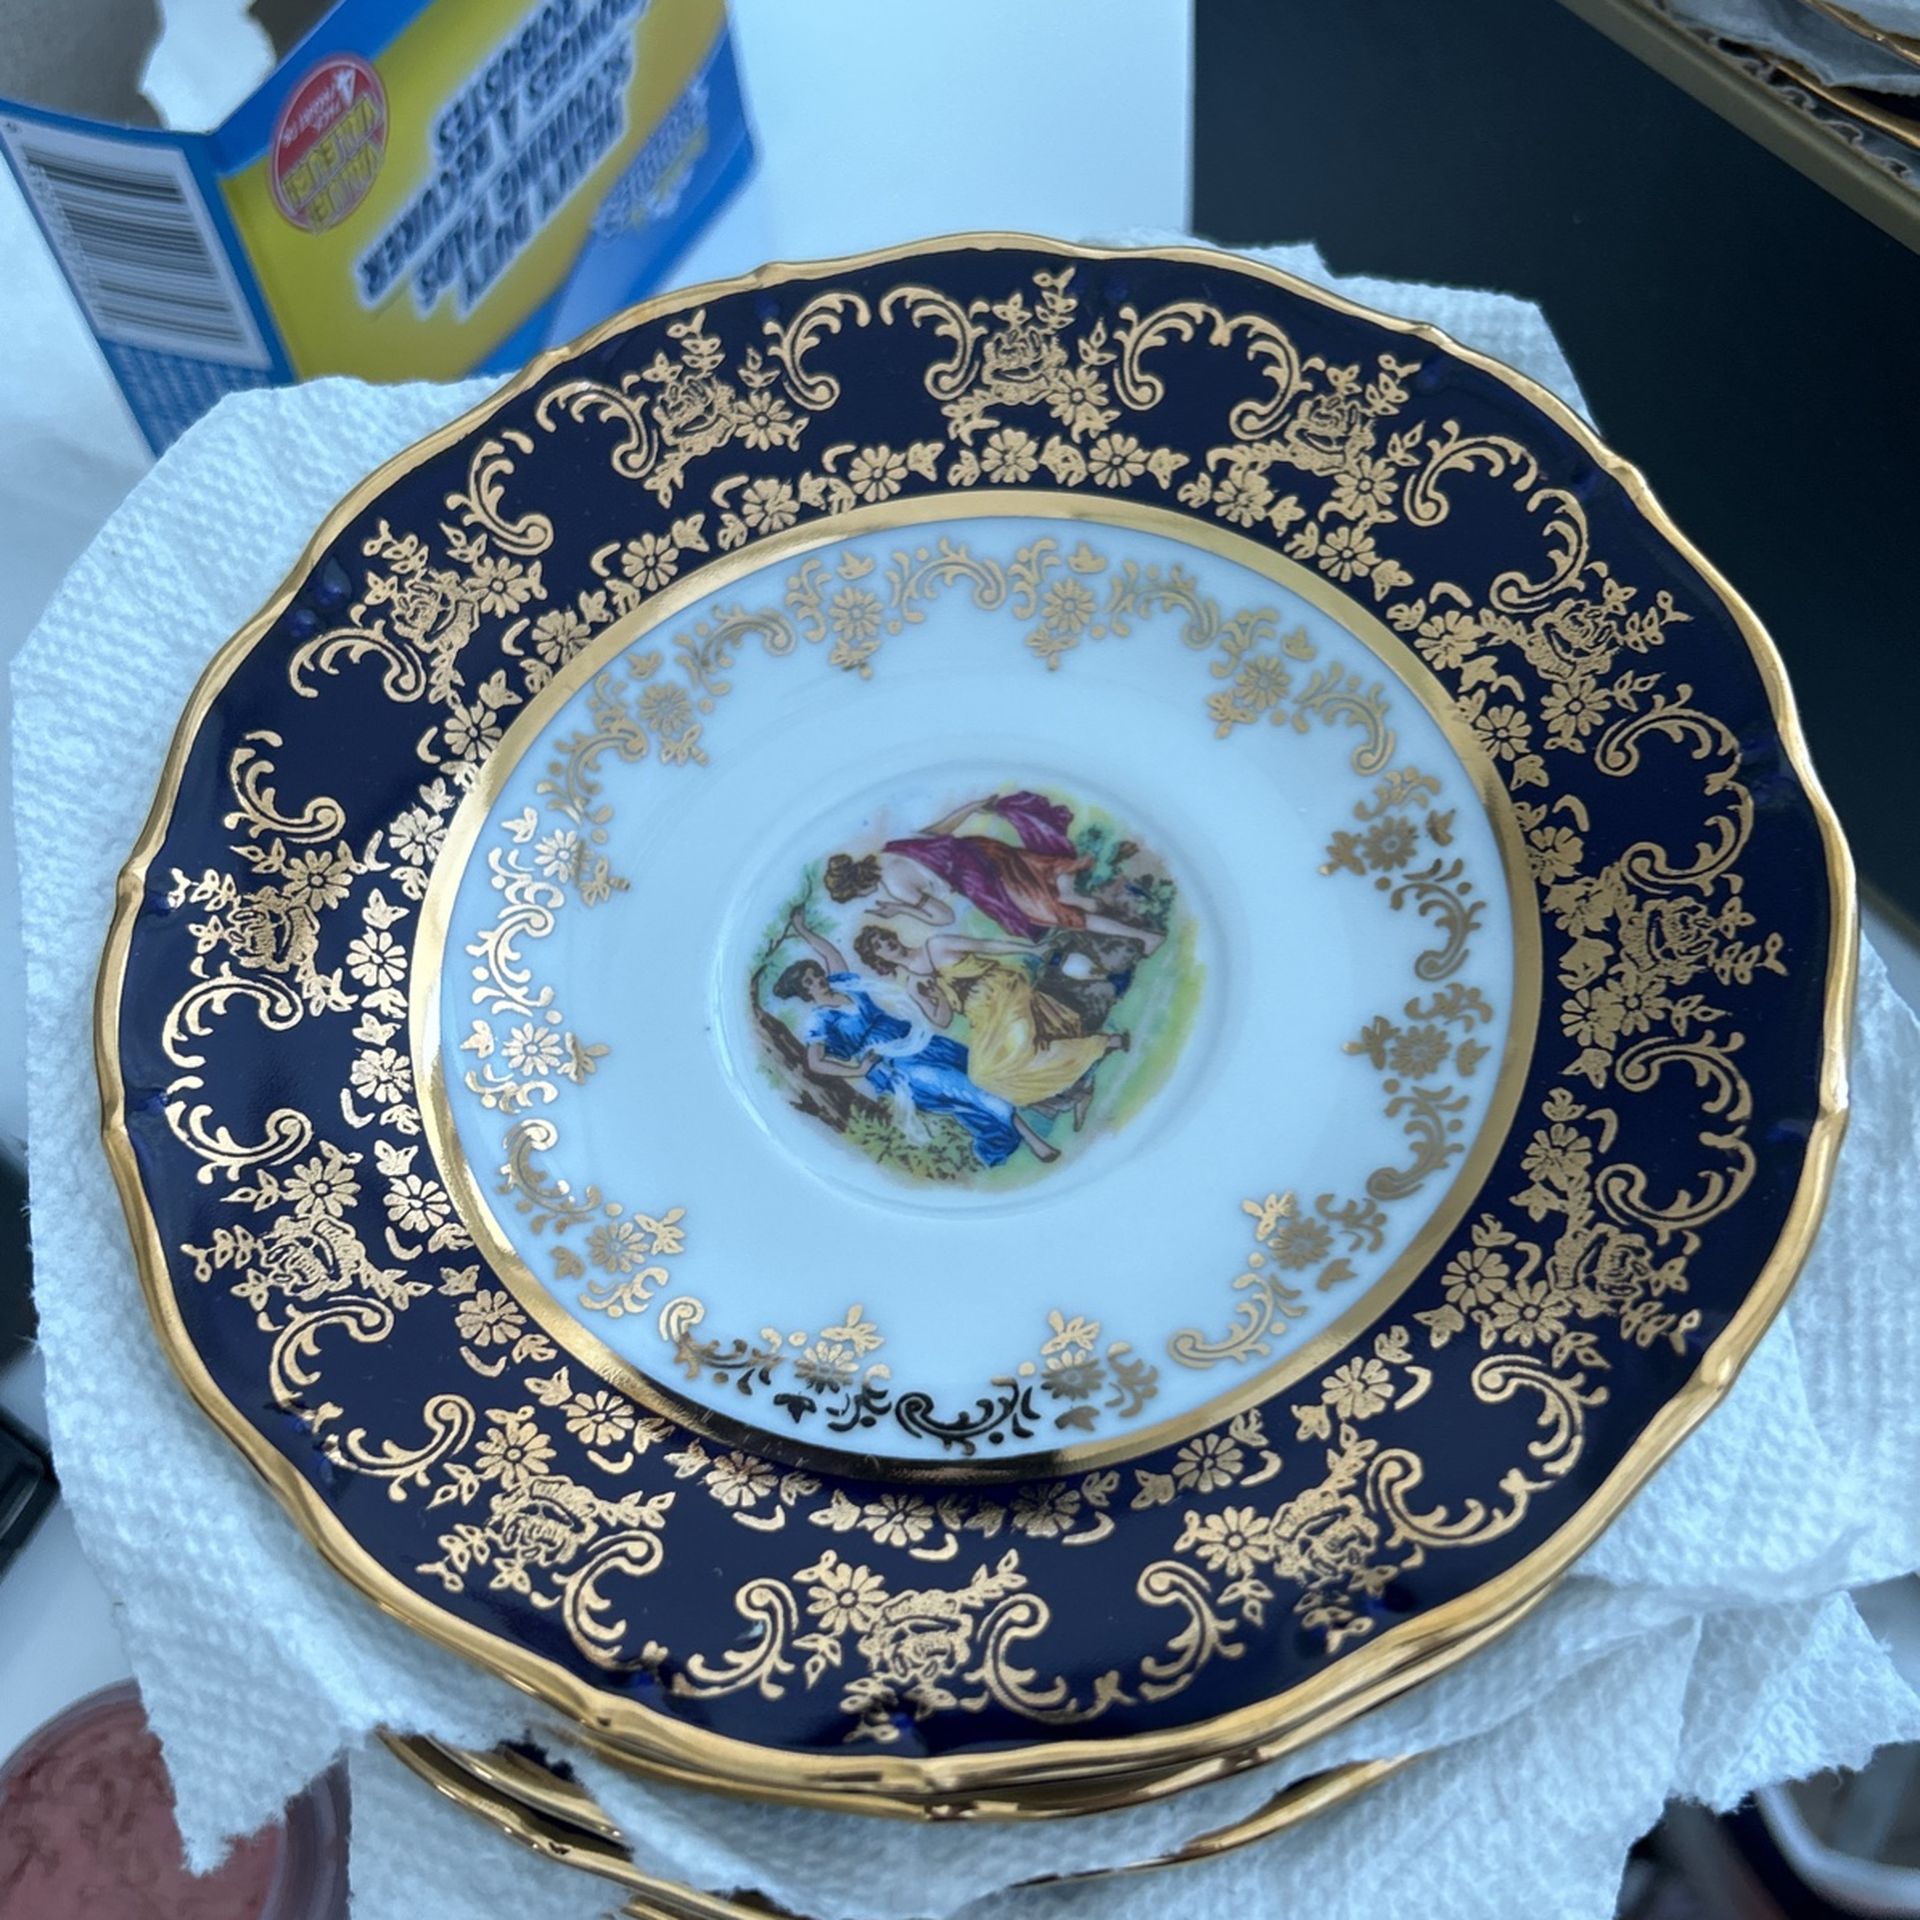 12 Saucers Or Dessert Plates, 5 Inches